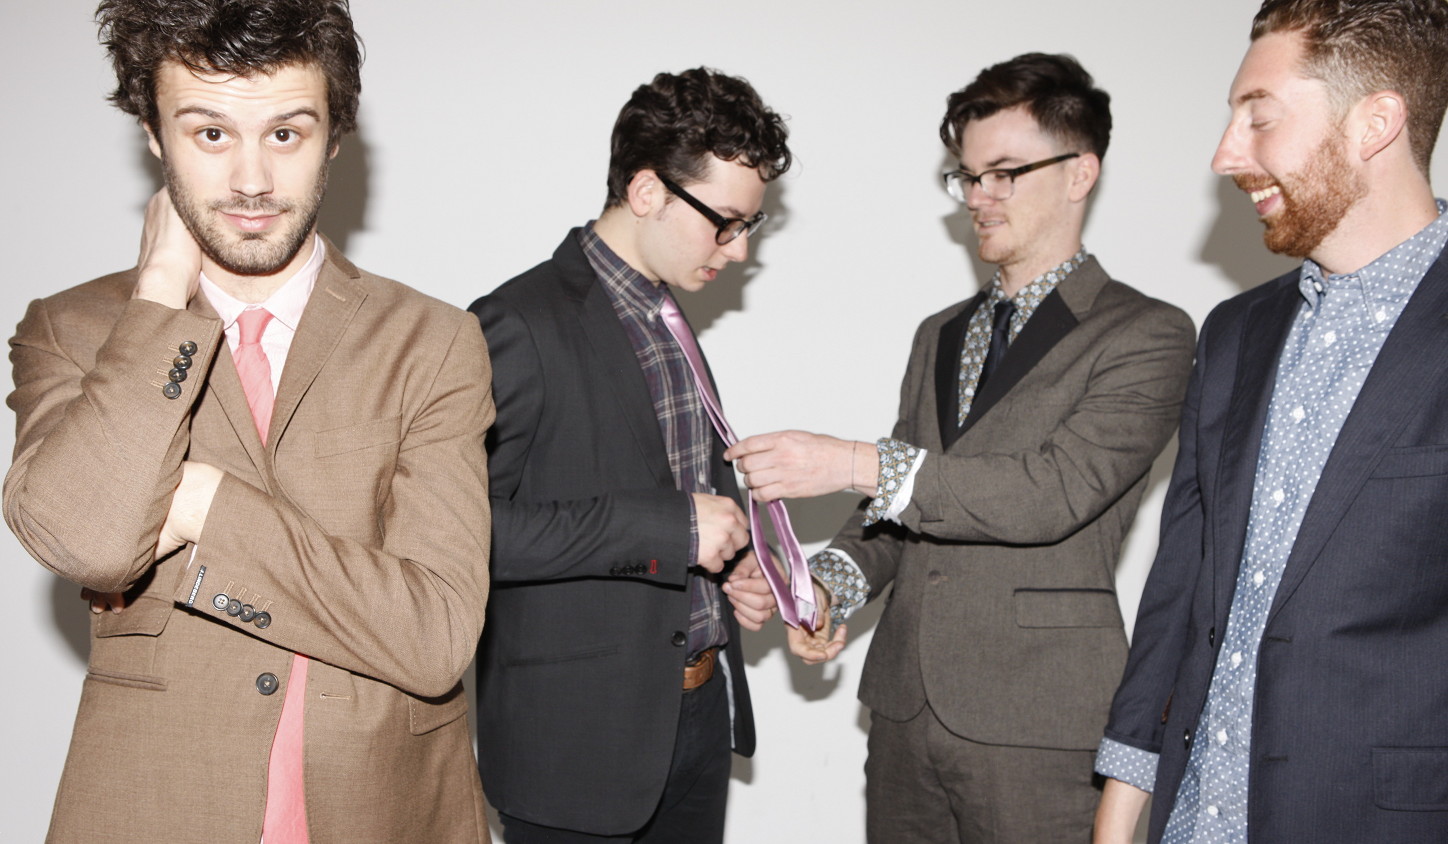 Группа passion Pit. Passion Pit игра. Passion Pit game all photos. Where i come from passion Pit. Passion pit